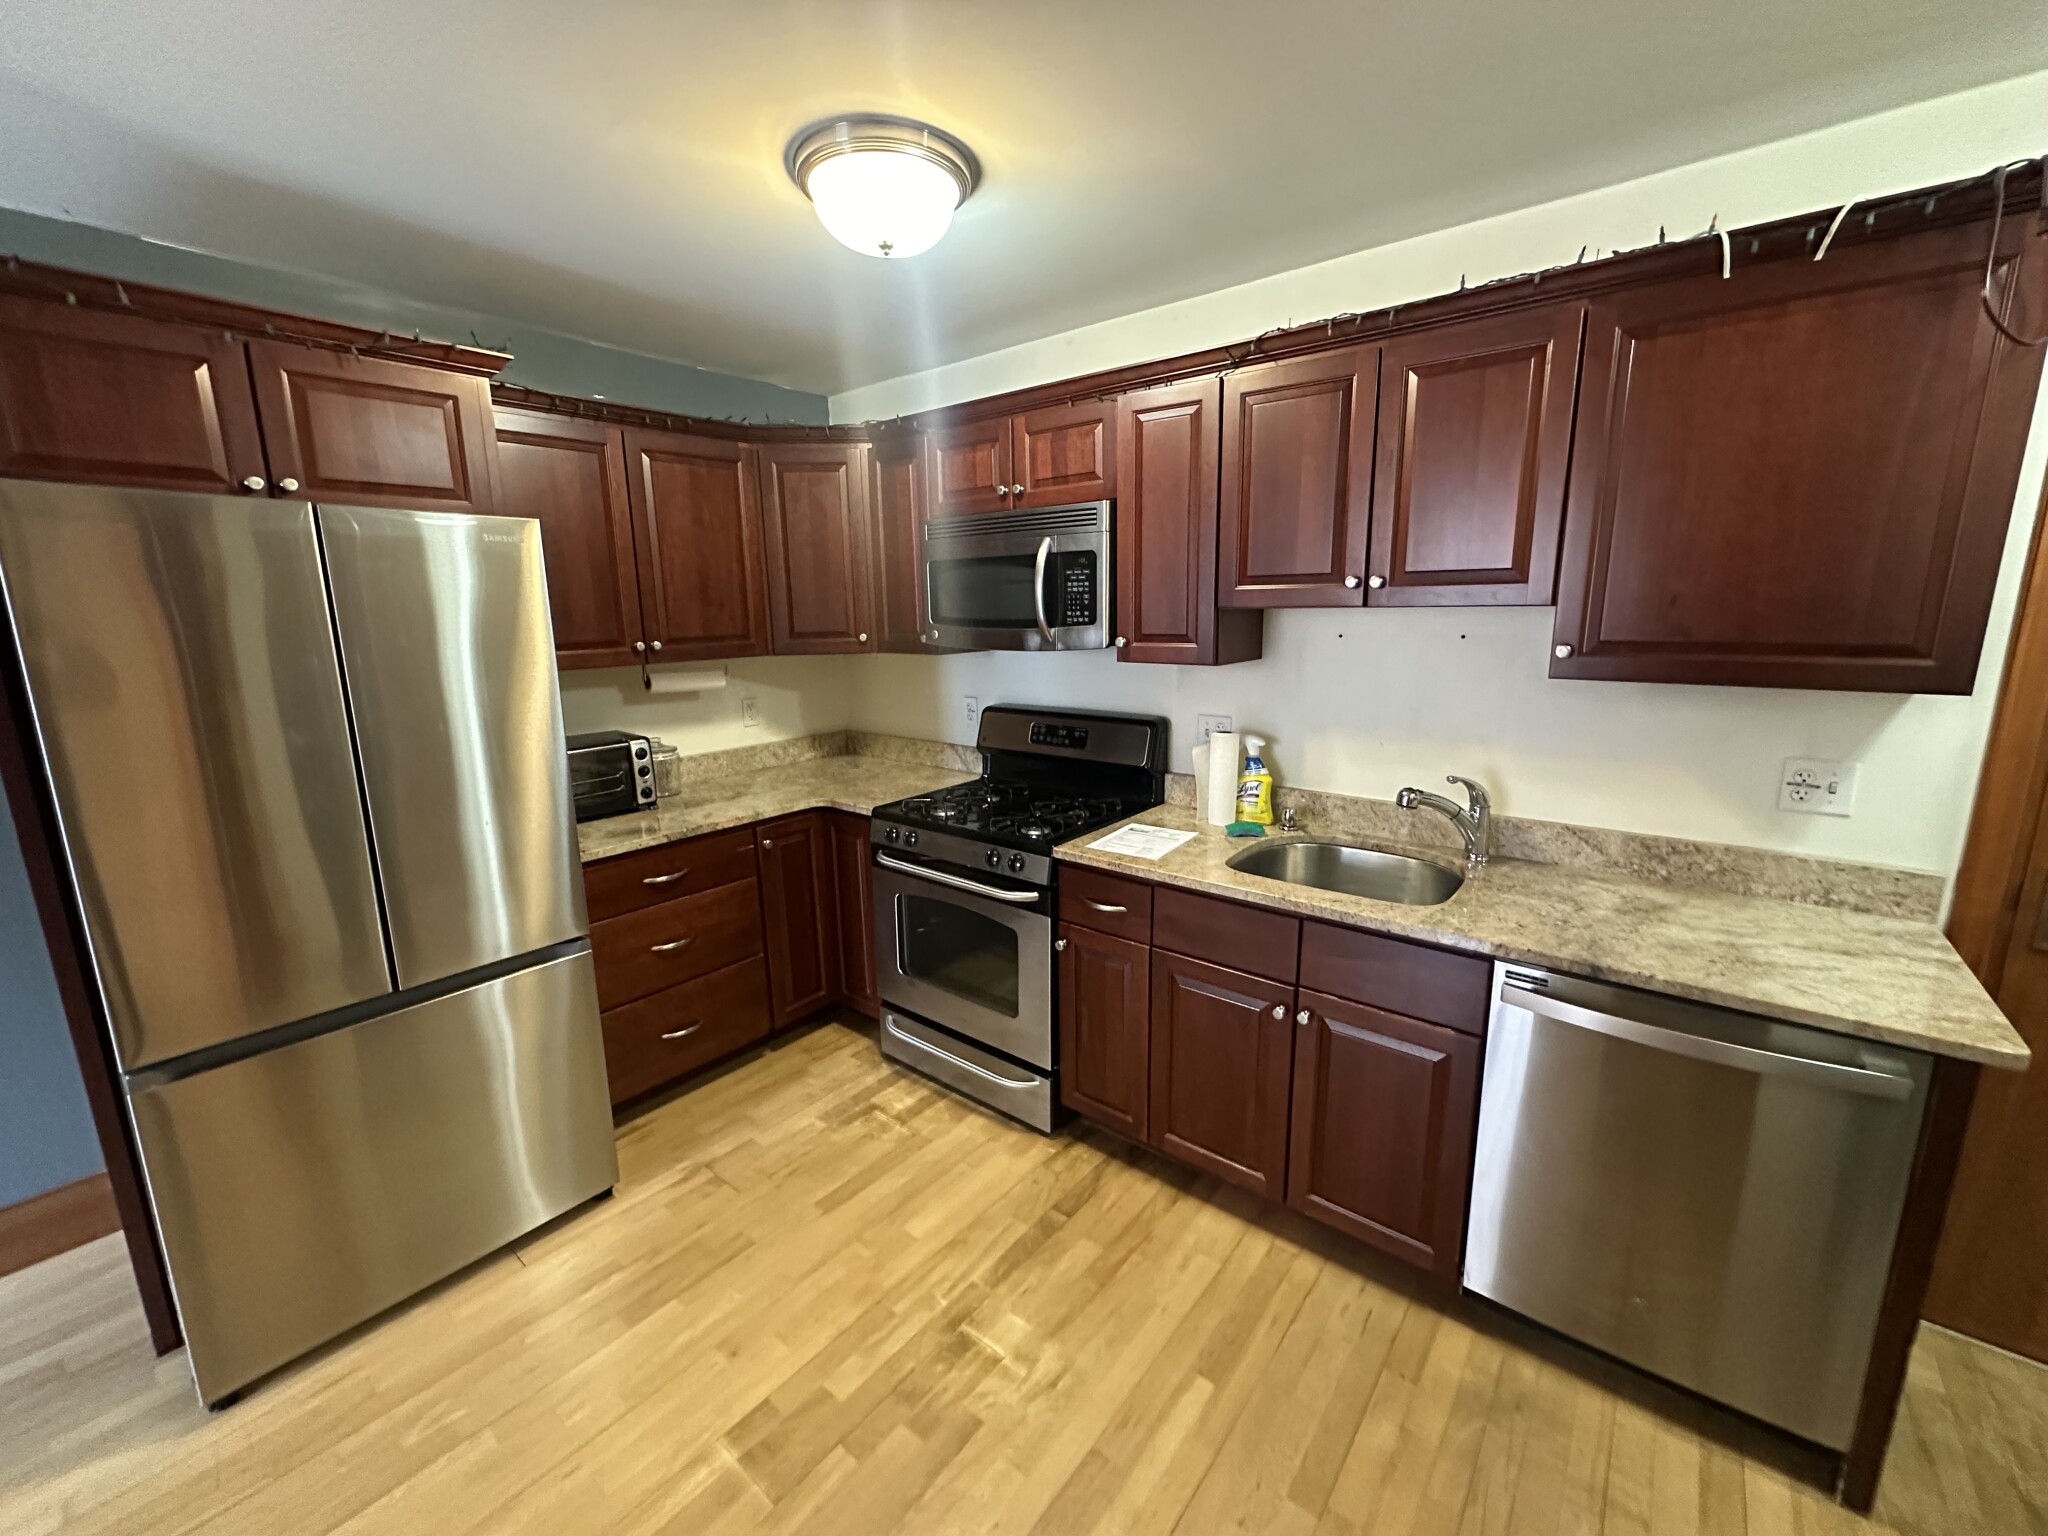 Photos of apartment on Kidder Ave.,Somerville MA 02144